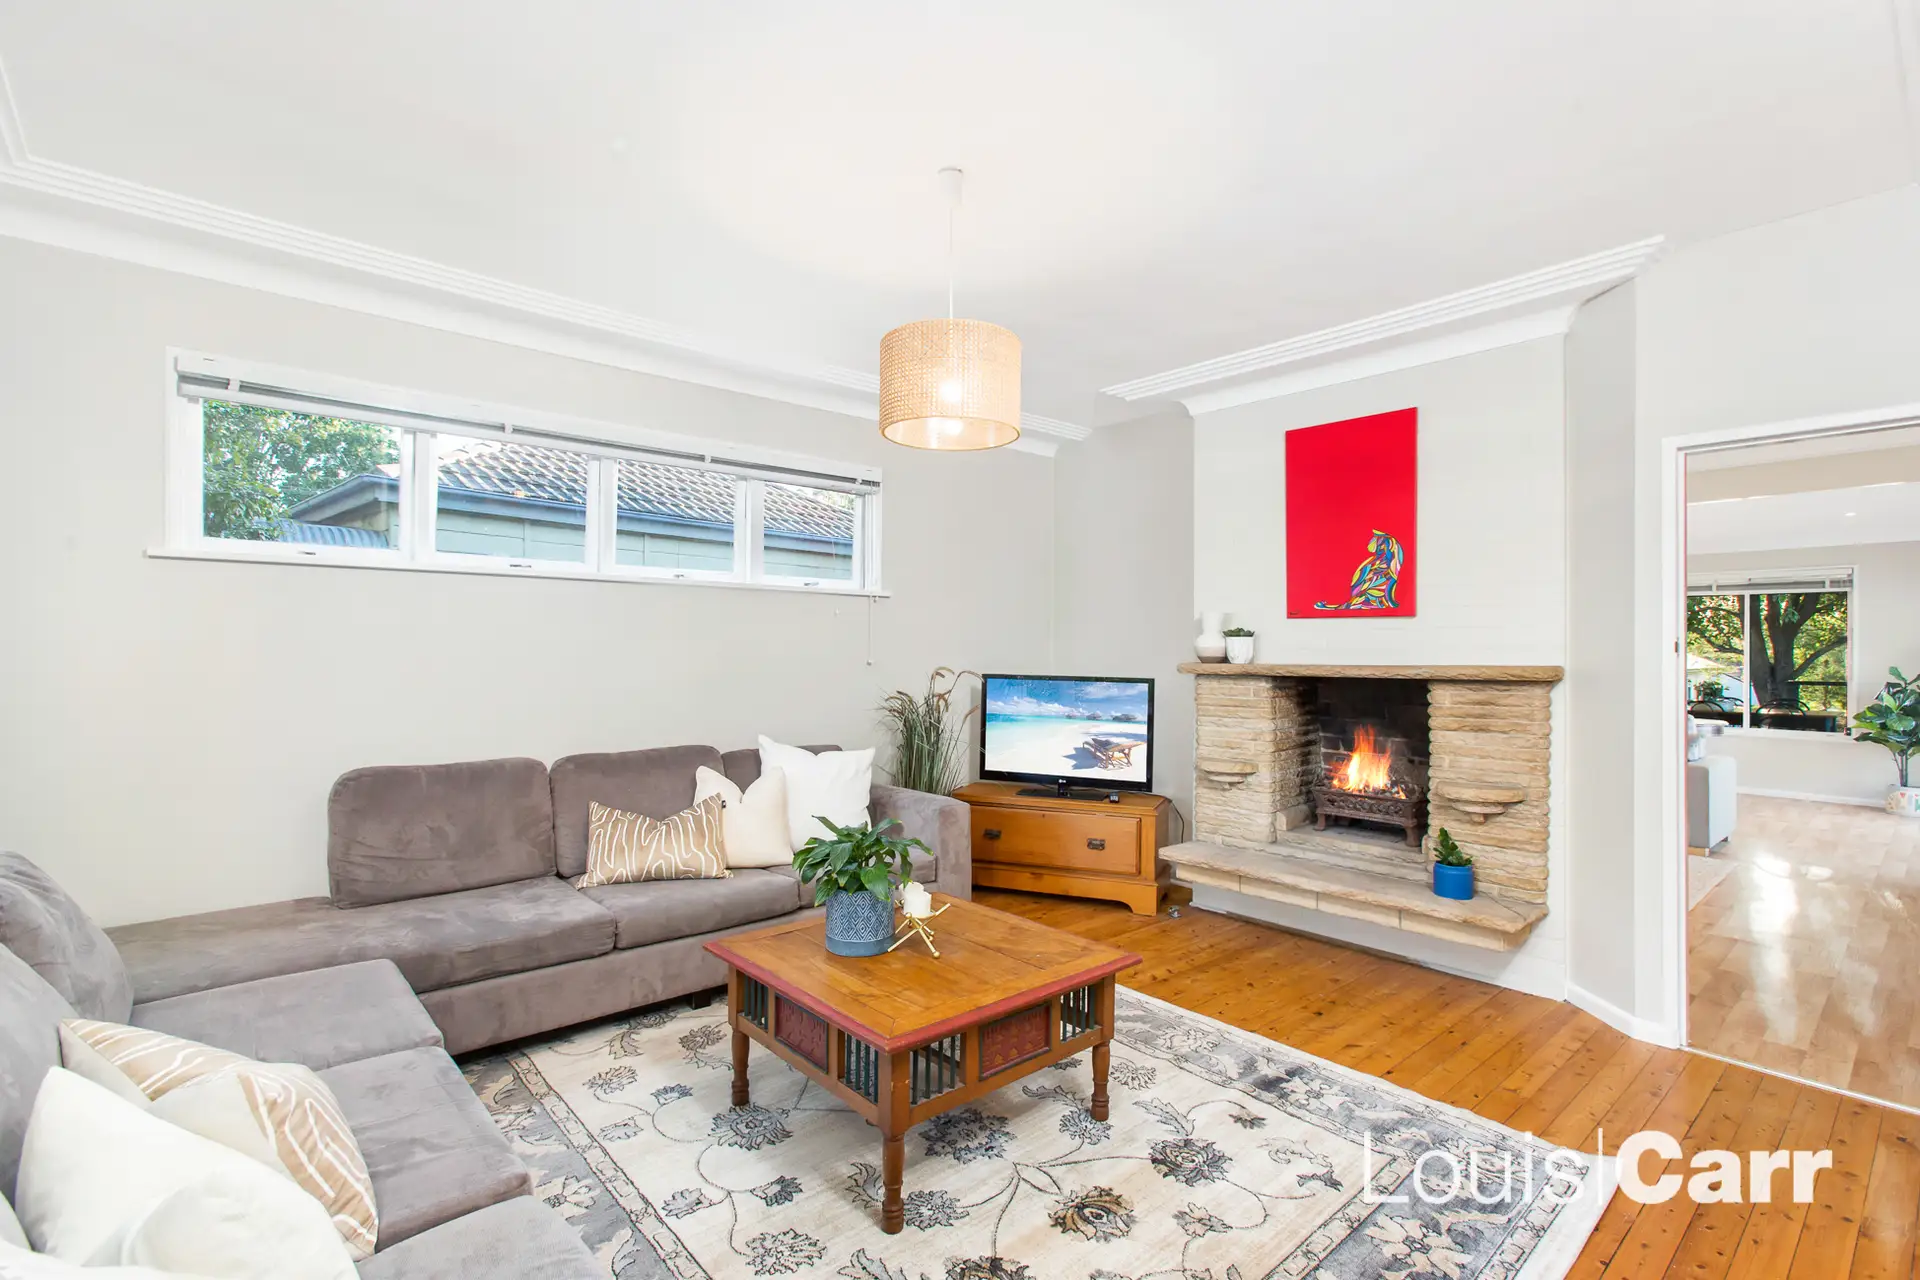 39 New Line Road, West Pennant Hills Sold by Louis Carr Real Estate - image 1